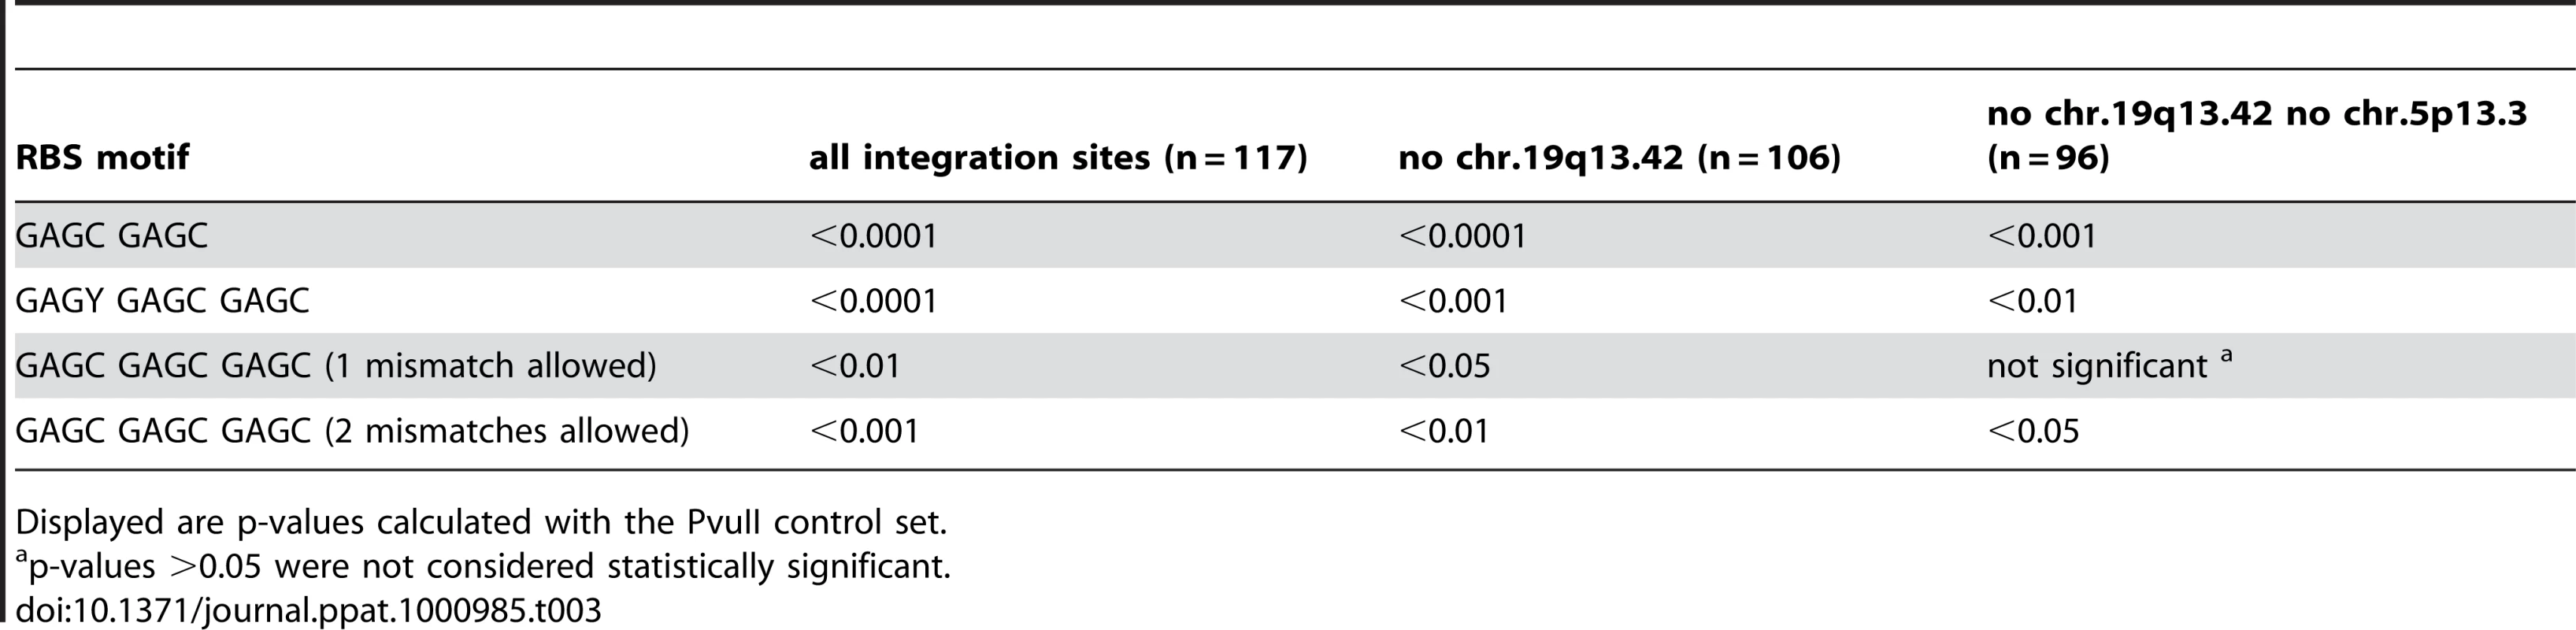 Neighbourhood analysis of wildtype AAV-2 integration sites and RBS motifs found outside of the hotspots on chr. 19q13.42 (AAVS1) and on chr. 5p13.3 (AAVS2).